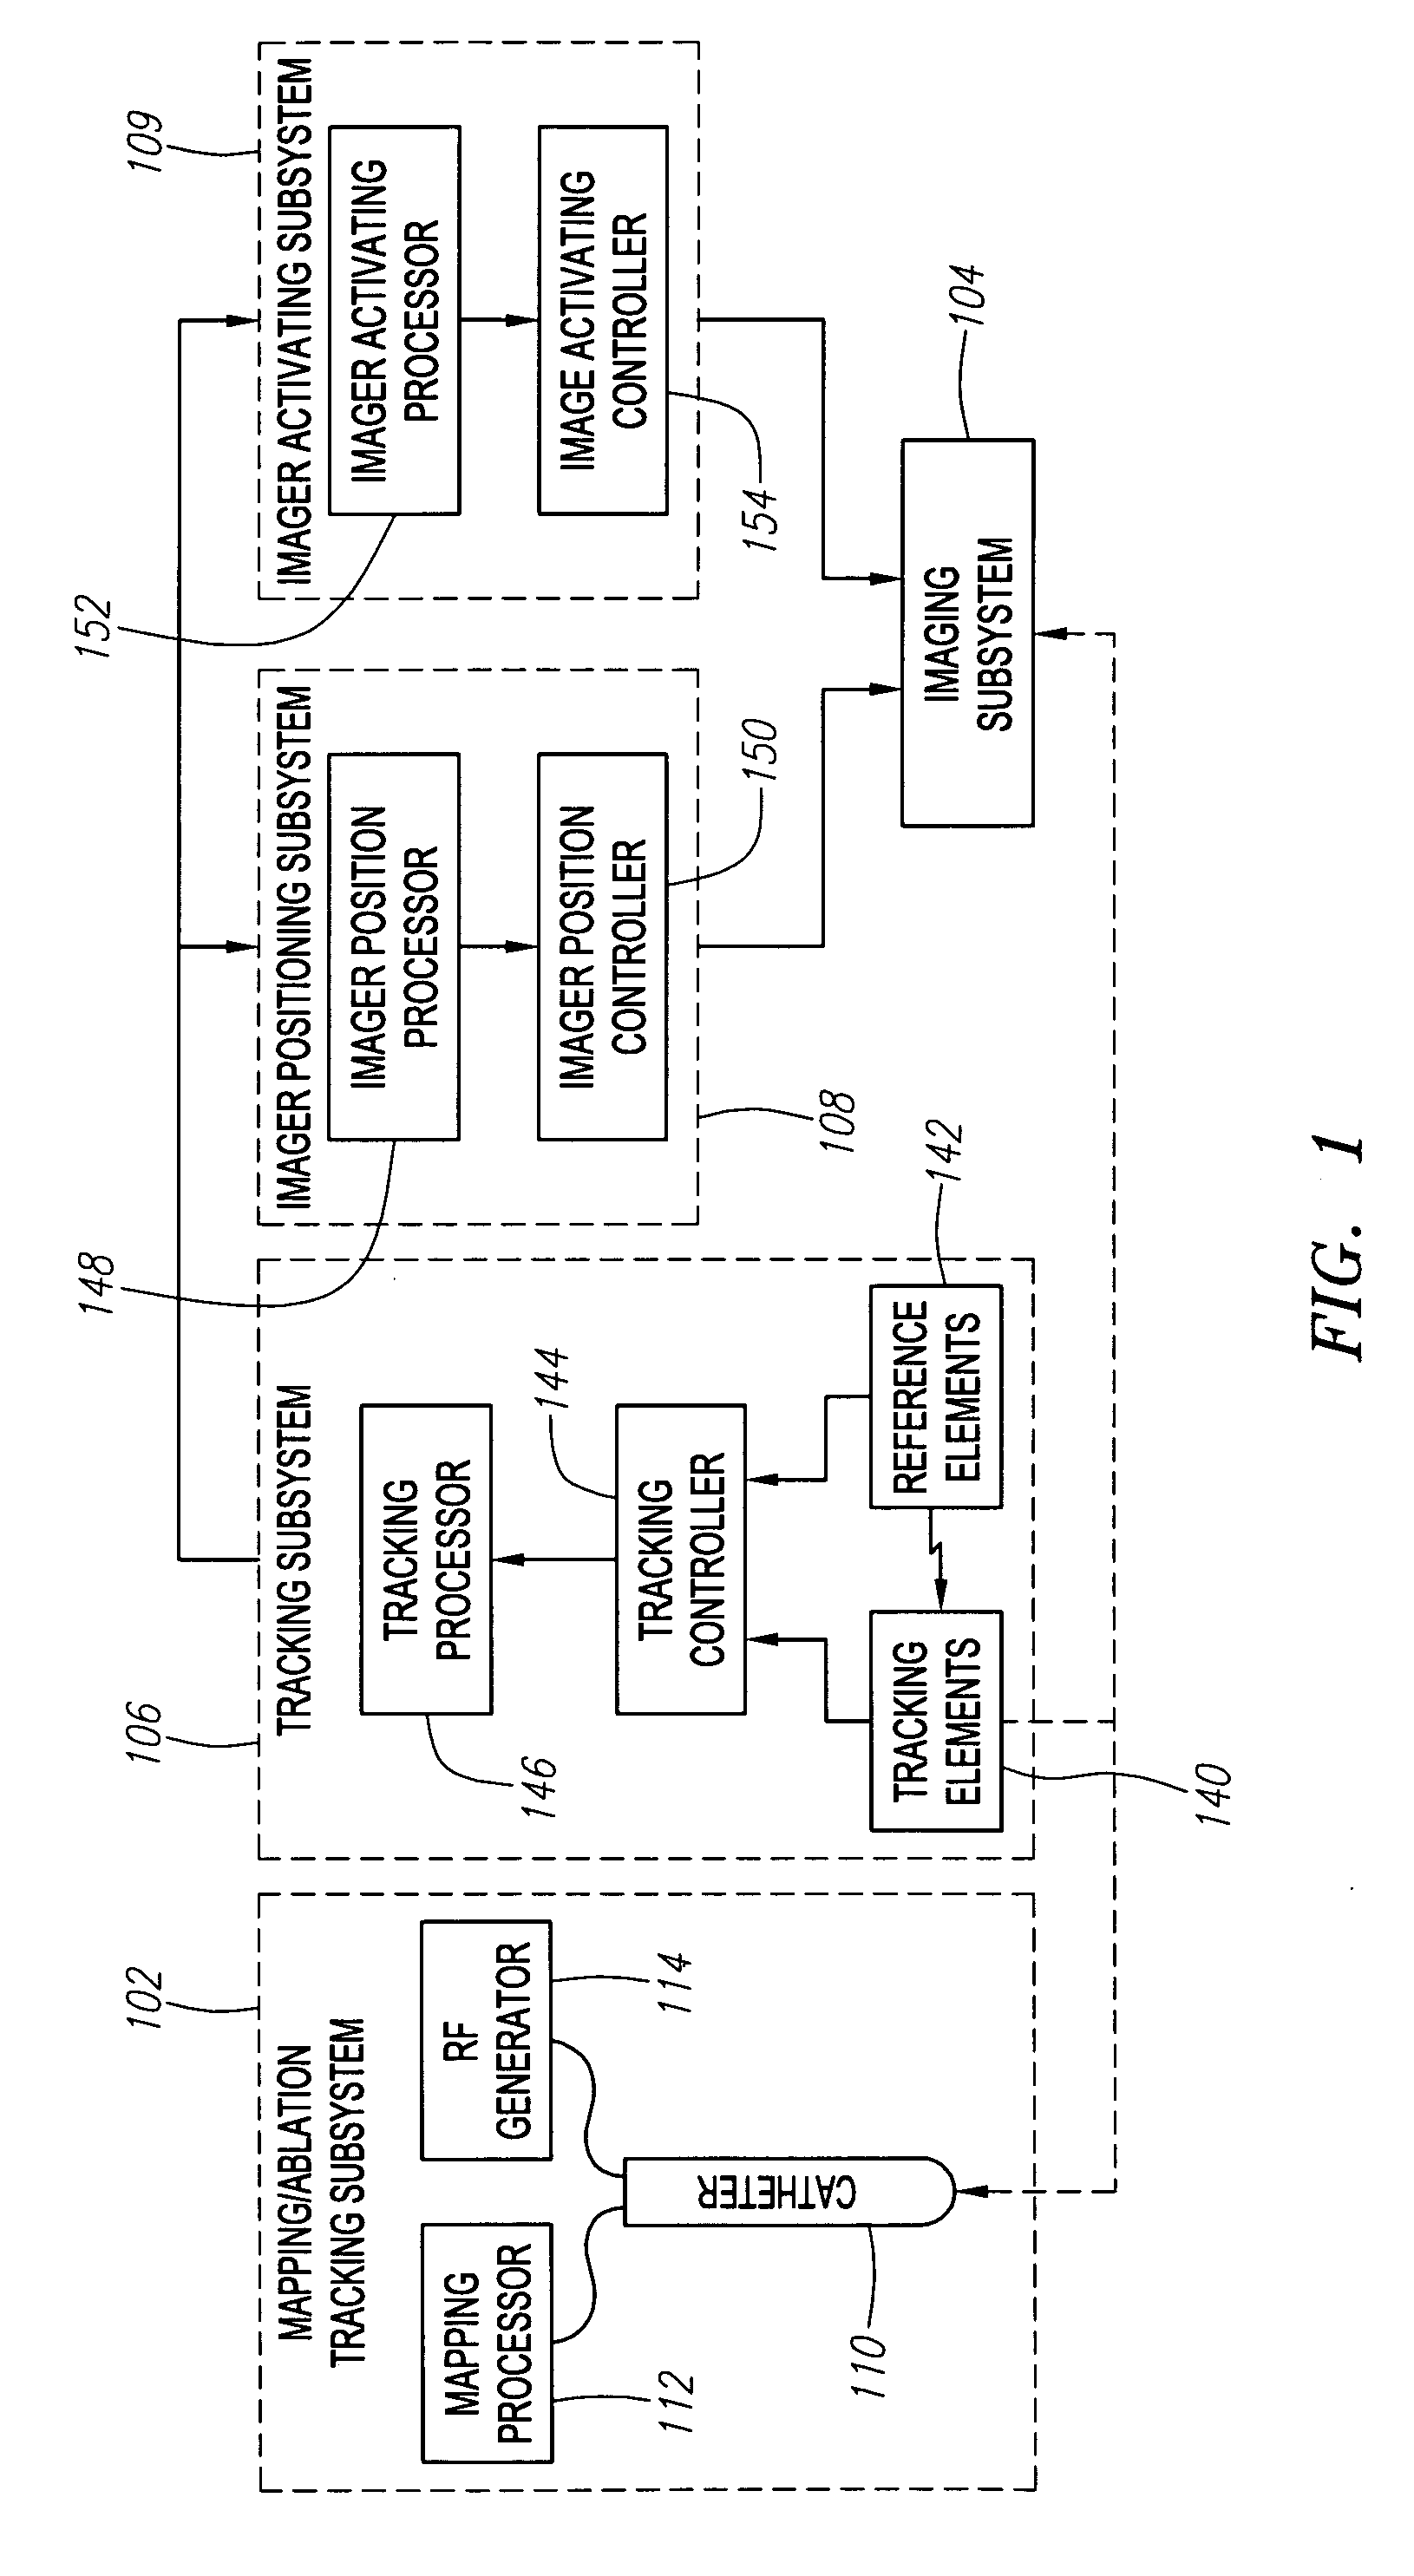 Automated activation/deactivation of imaging device based on tracked medical device position